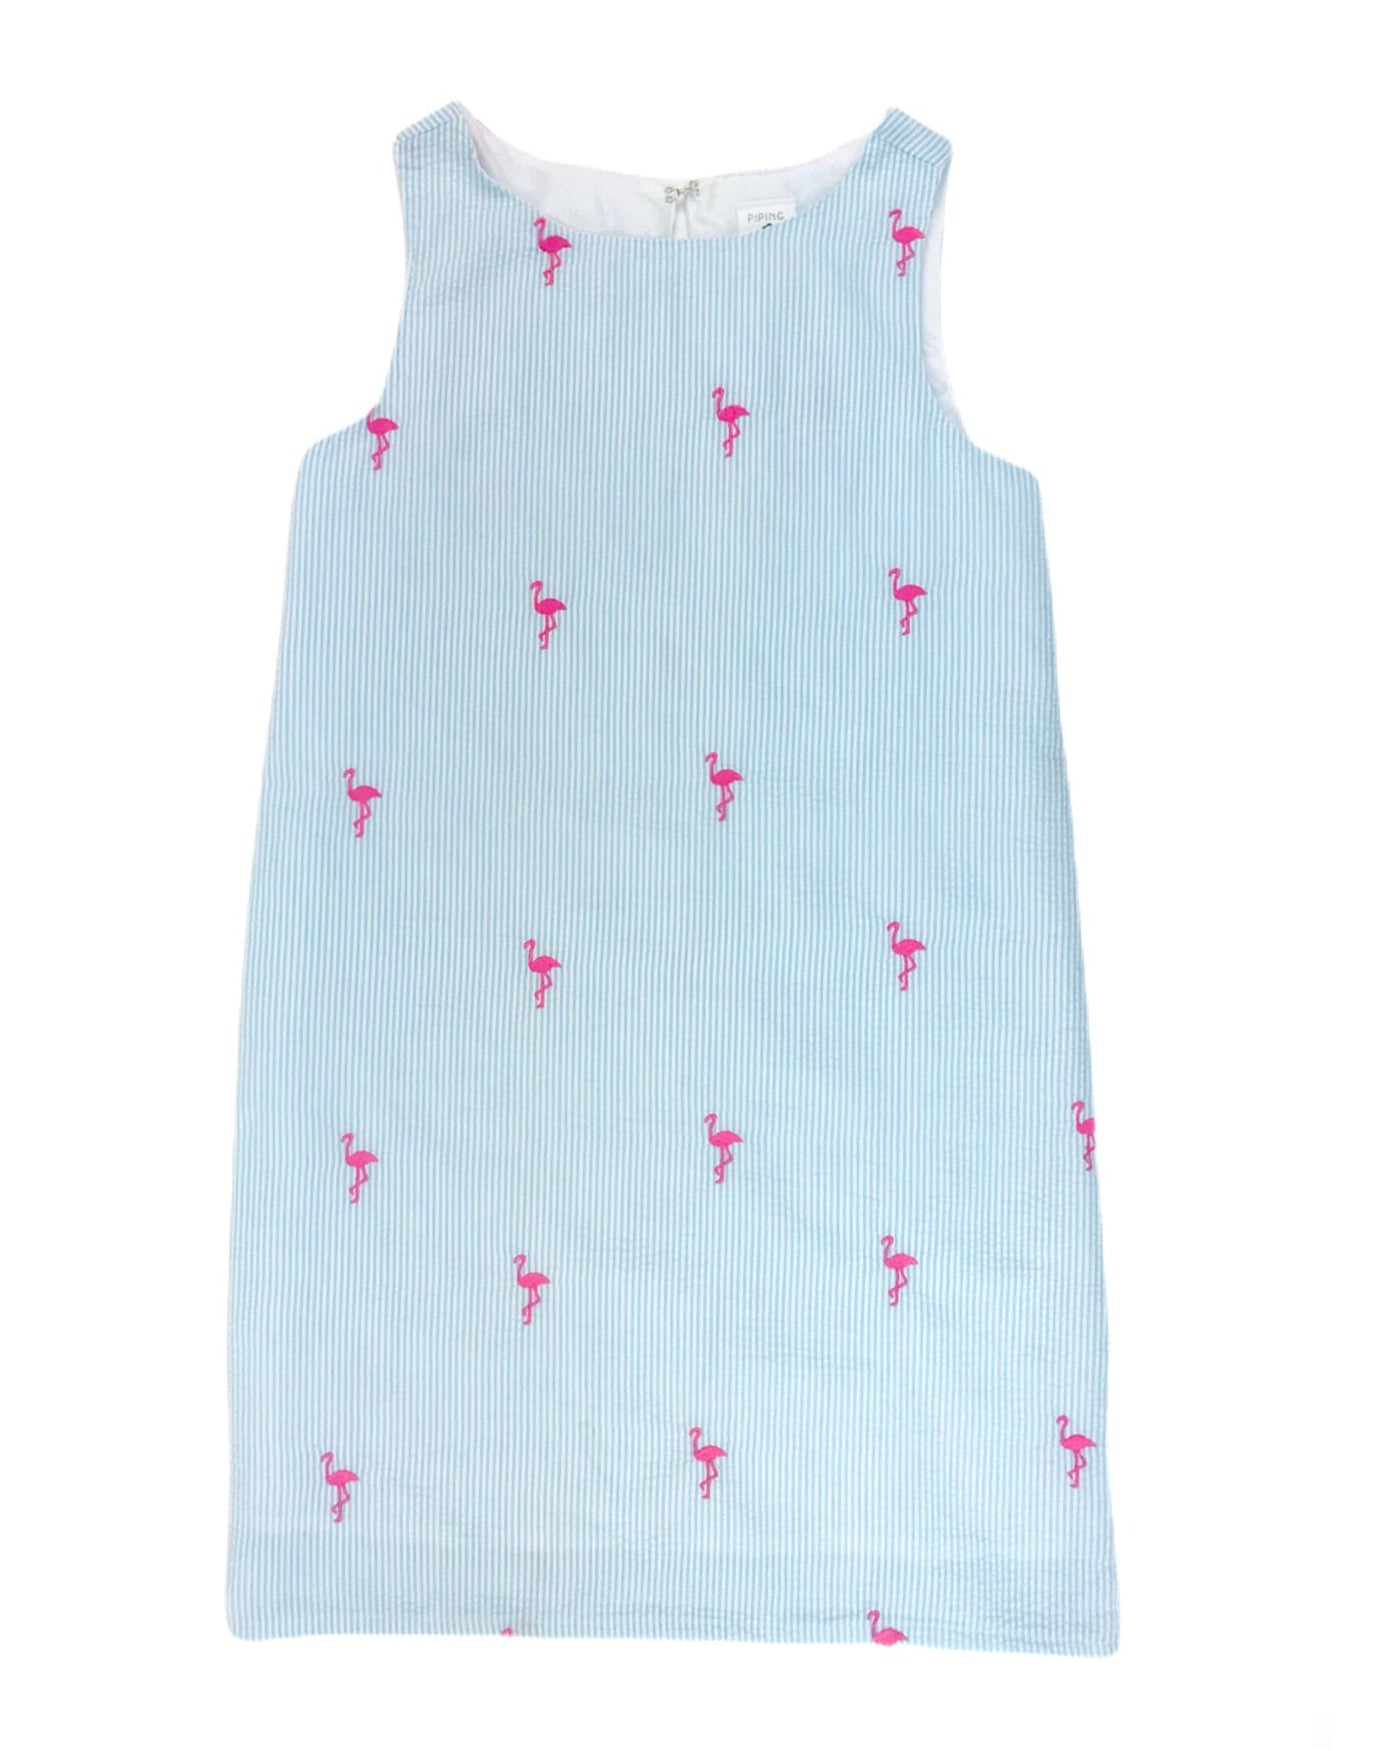 Turquoise Seersucker Women's Dress with Pink Embroidered Flamingos